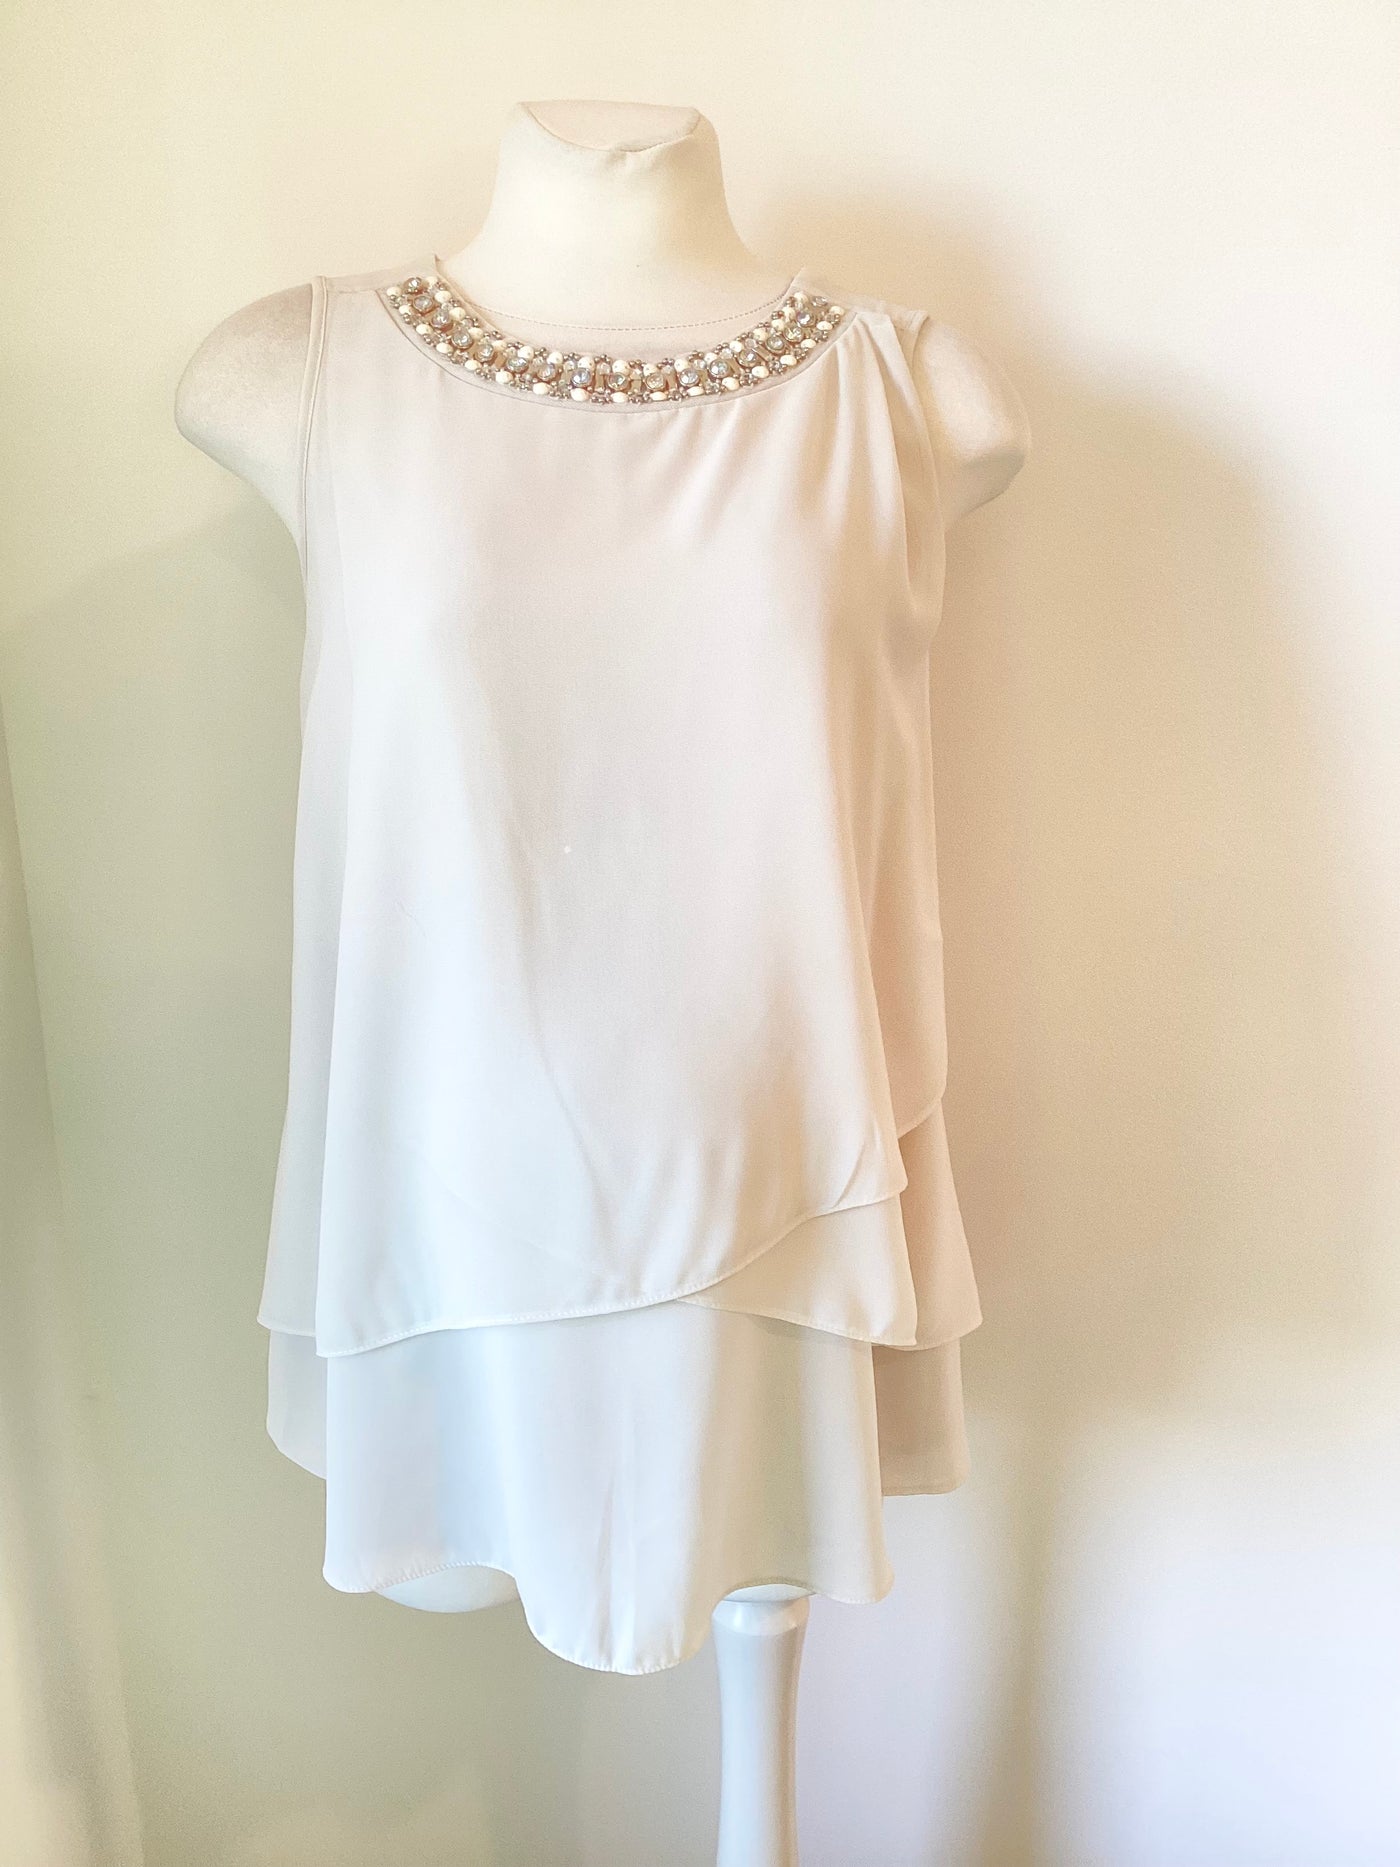 George Maternity off white sleeveless top with jewelled collar - Size 8 (more like 8/10)